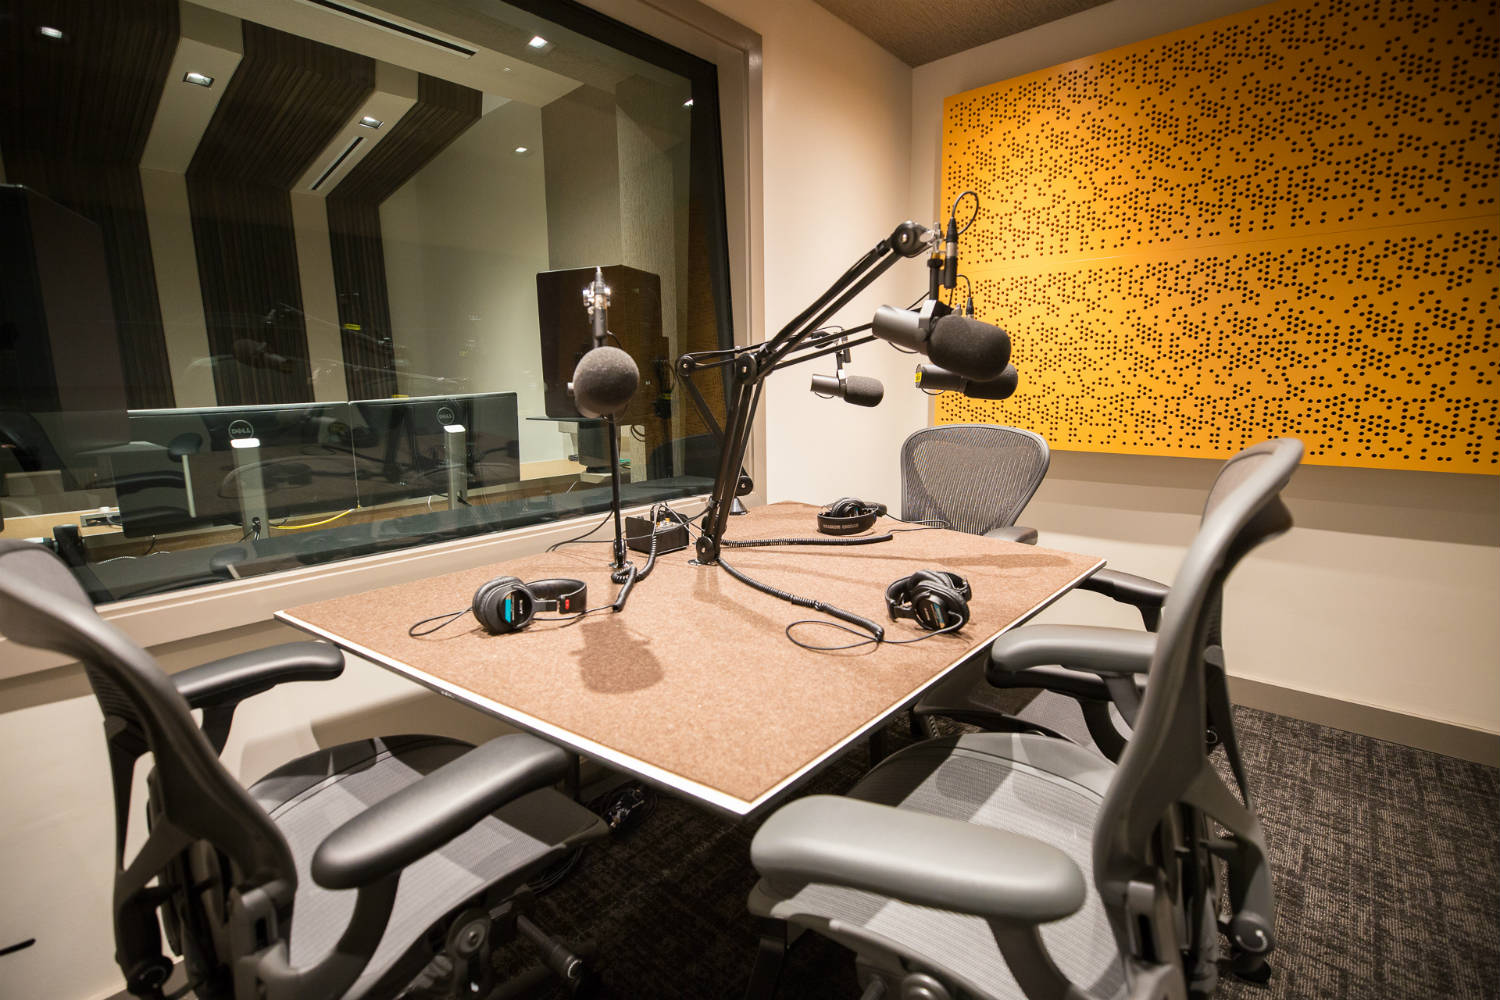 Audible is the world’s largest producer/distributor of downloadable audiobooks and other spoken-word entertainment. WSDG was commissioned to design their new state-of-the-art recording studio complex. Live Room B